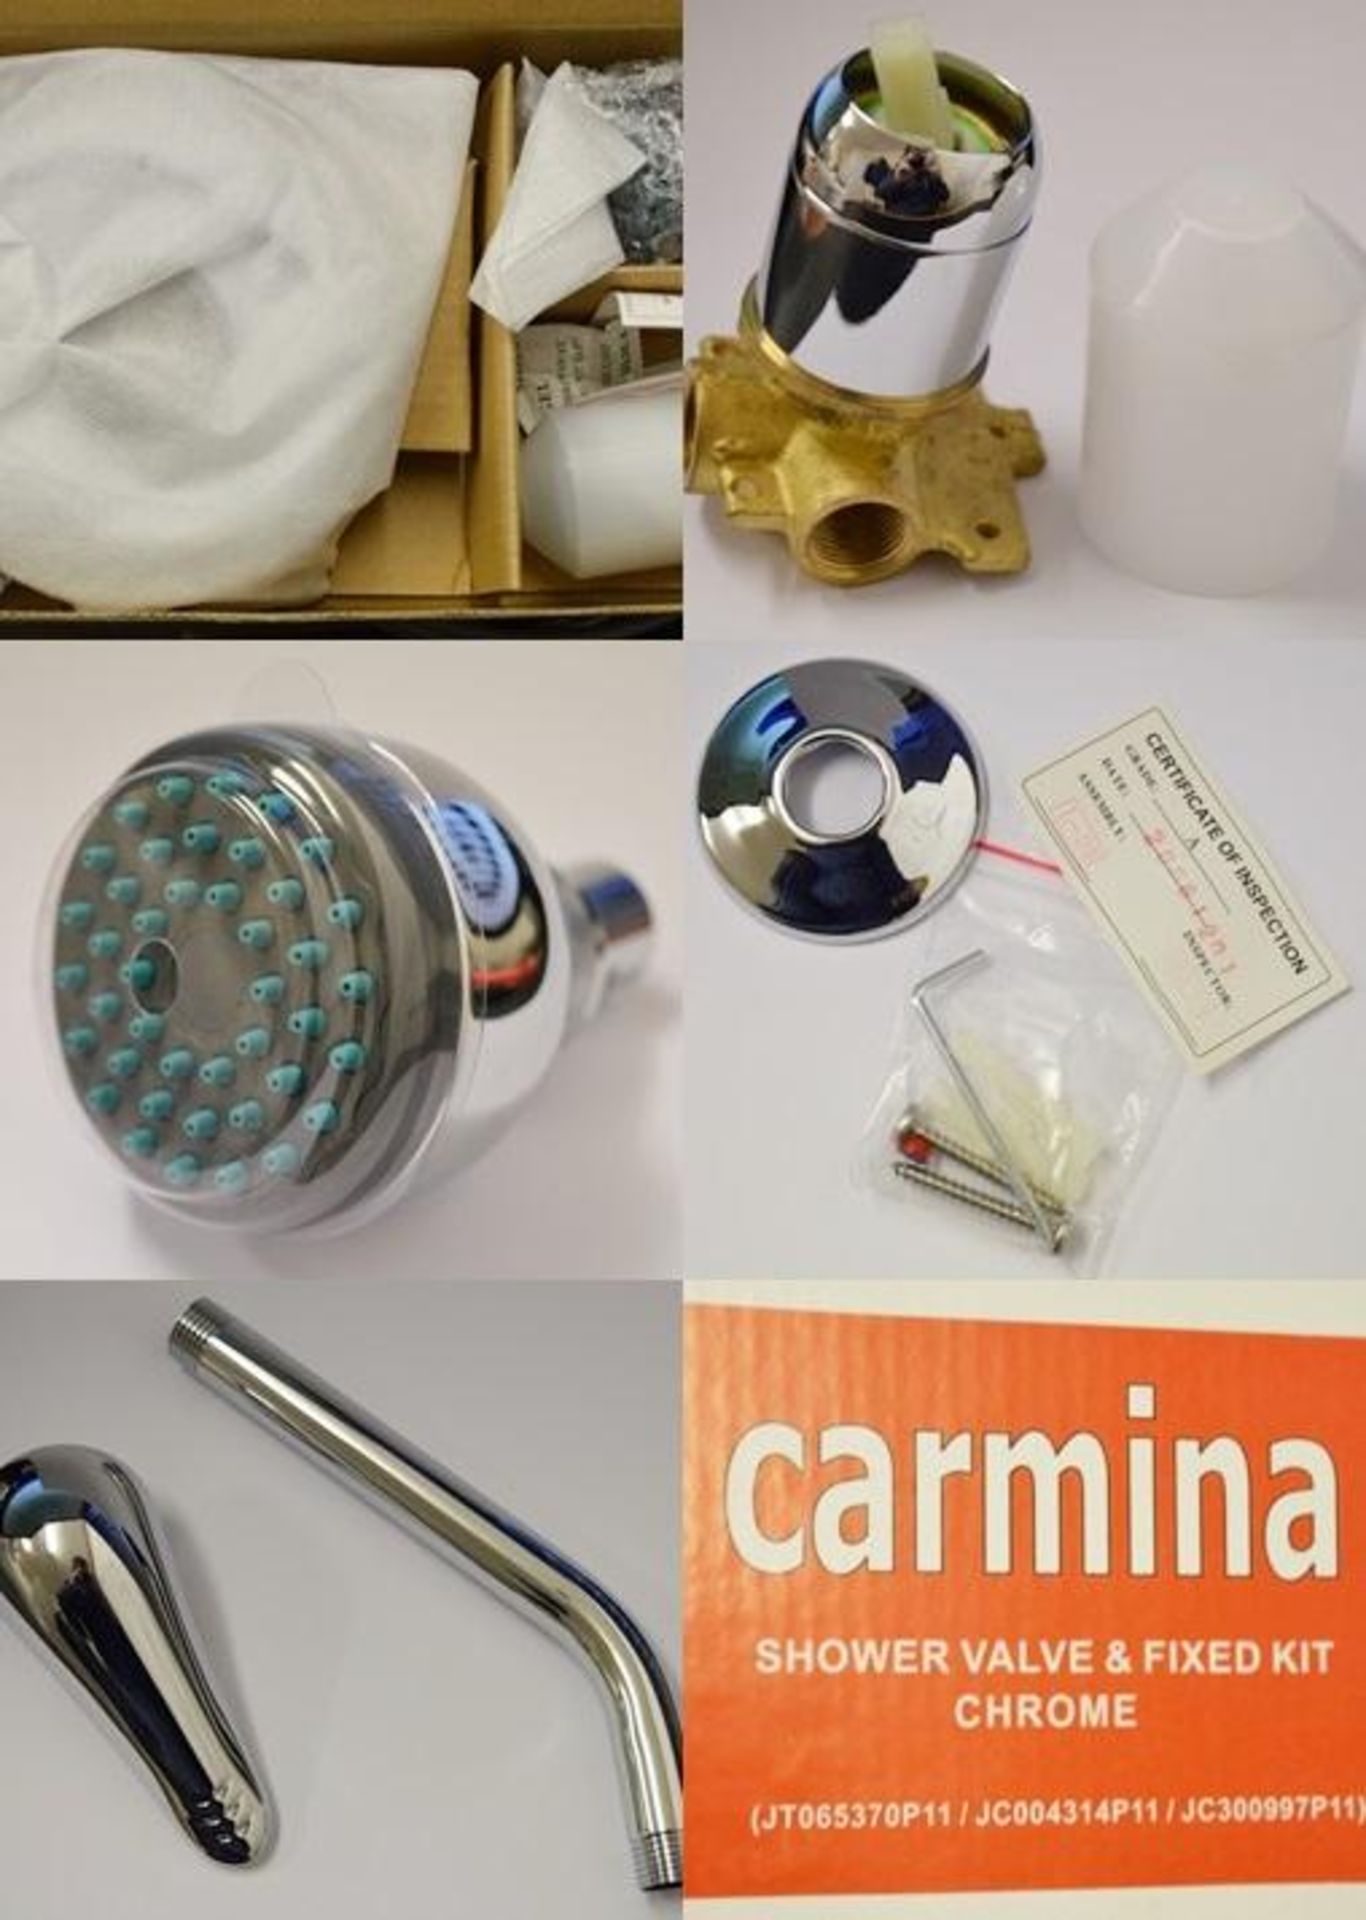 1 x Carmina Shower Valve Kit - Contains Chrome Shower Head, Fixed Arm and Manual Control - Brass - Image 4 of 7